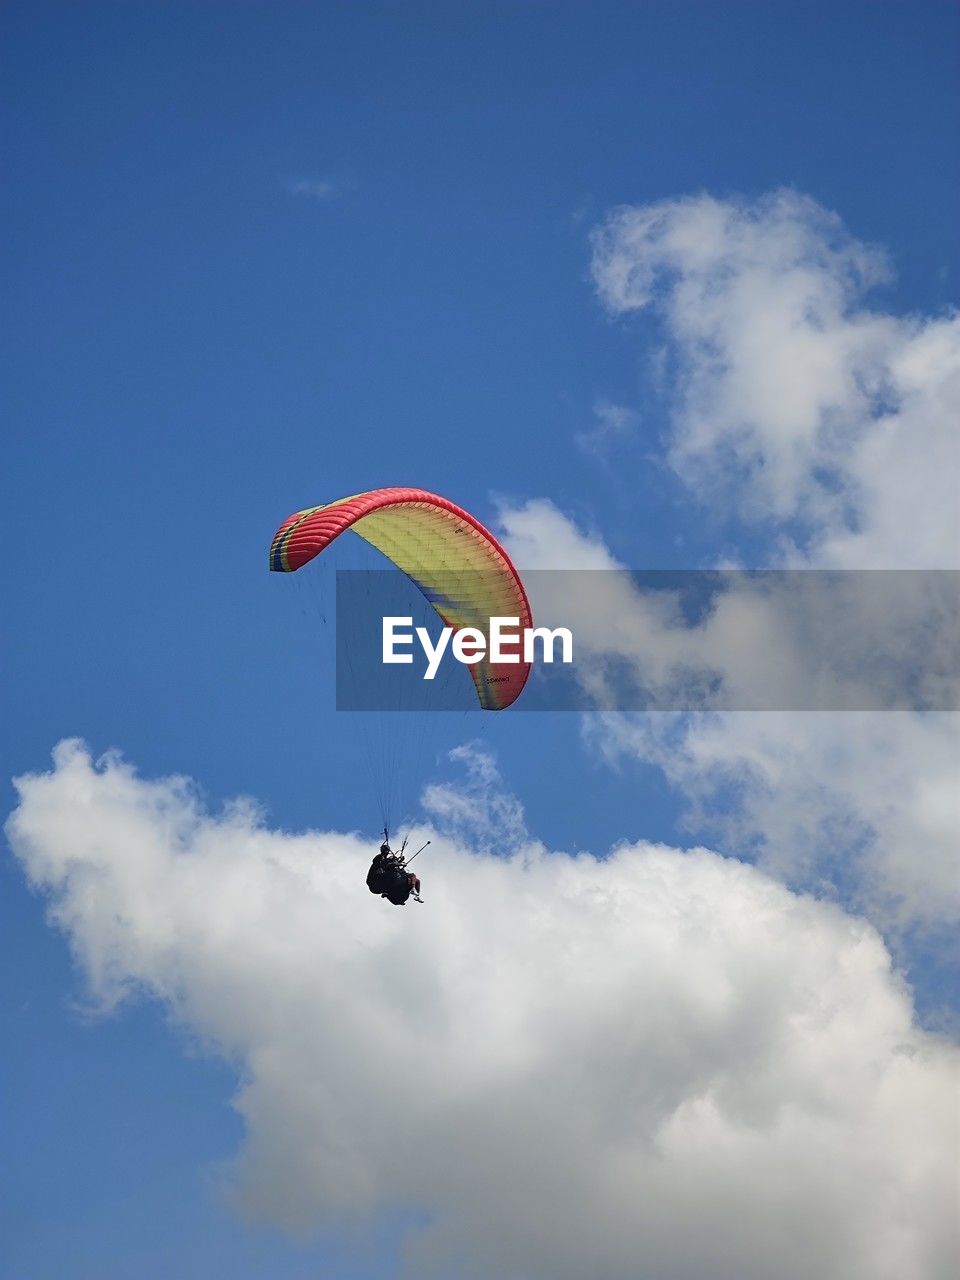 low angle view of person paragliding against cloudy sky